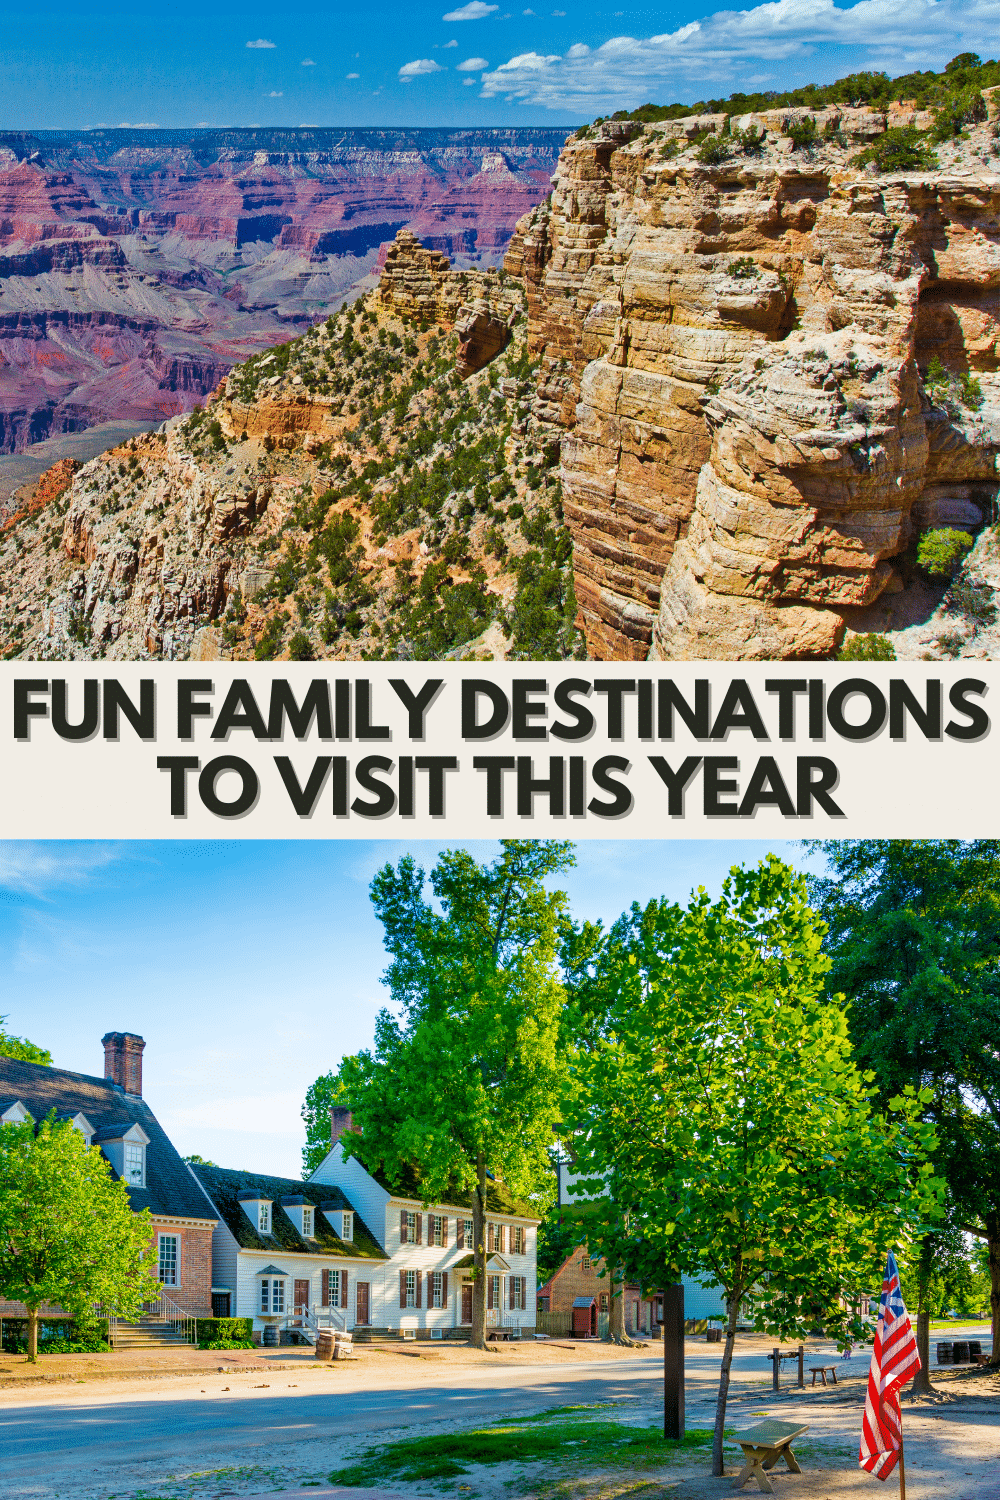 When it comes to taking off to fun family destinations, you are providing your family with opportunities to learn, bond and create long lasting memories. #familytravel #familydestinations via @wondermomwannab